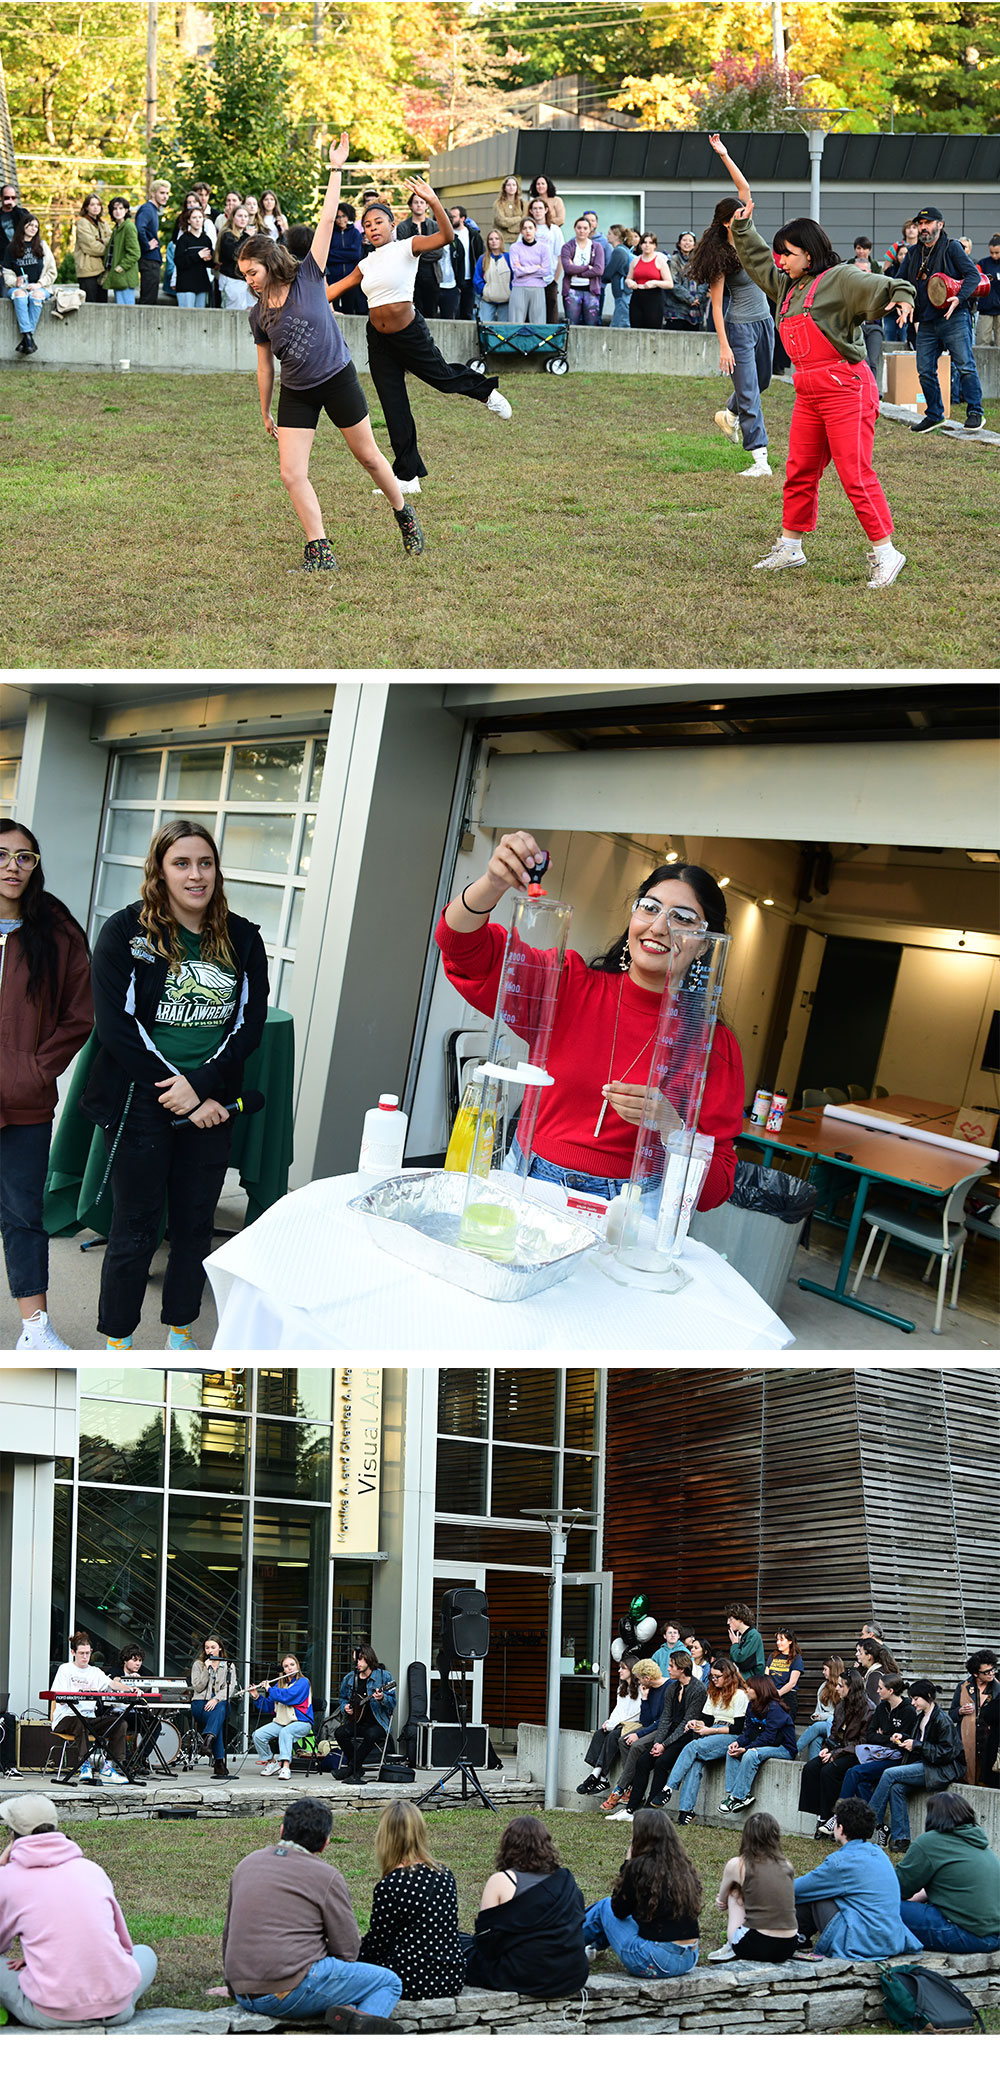 Collage of photos showing students at Celebrate SLC